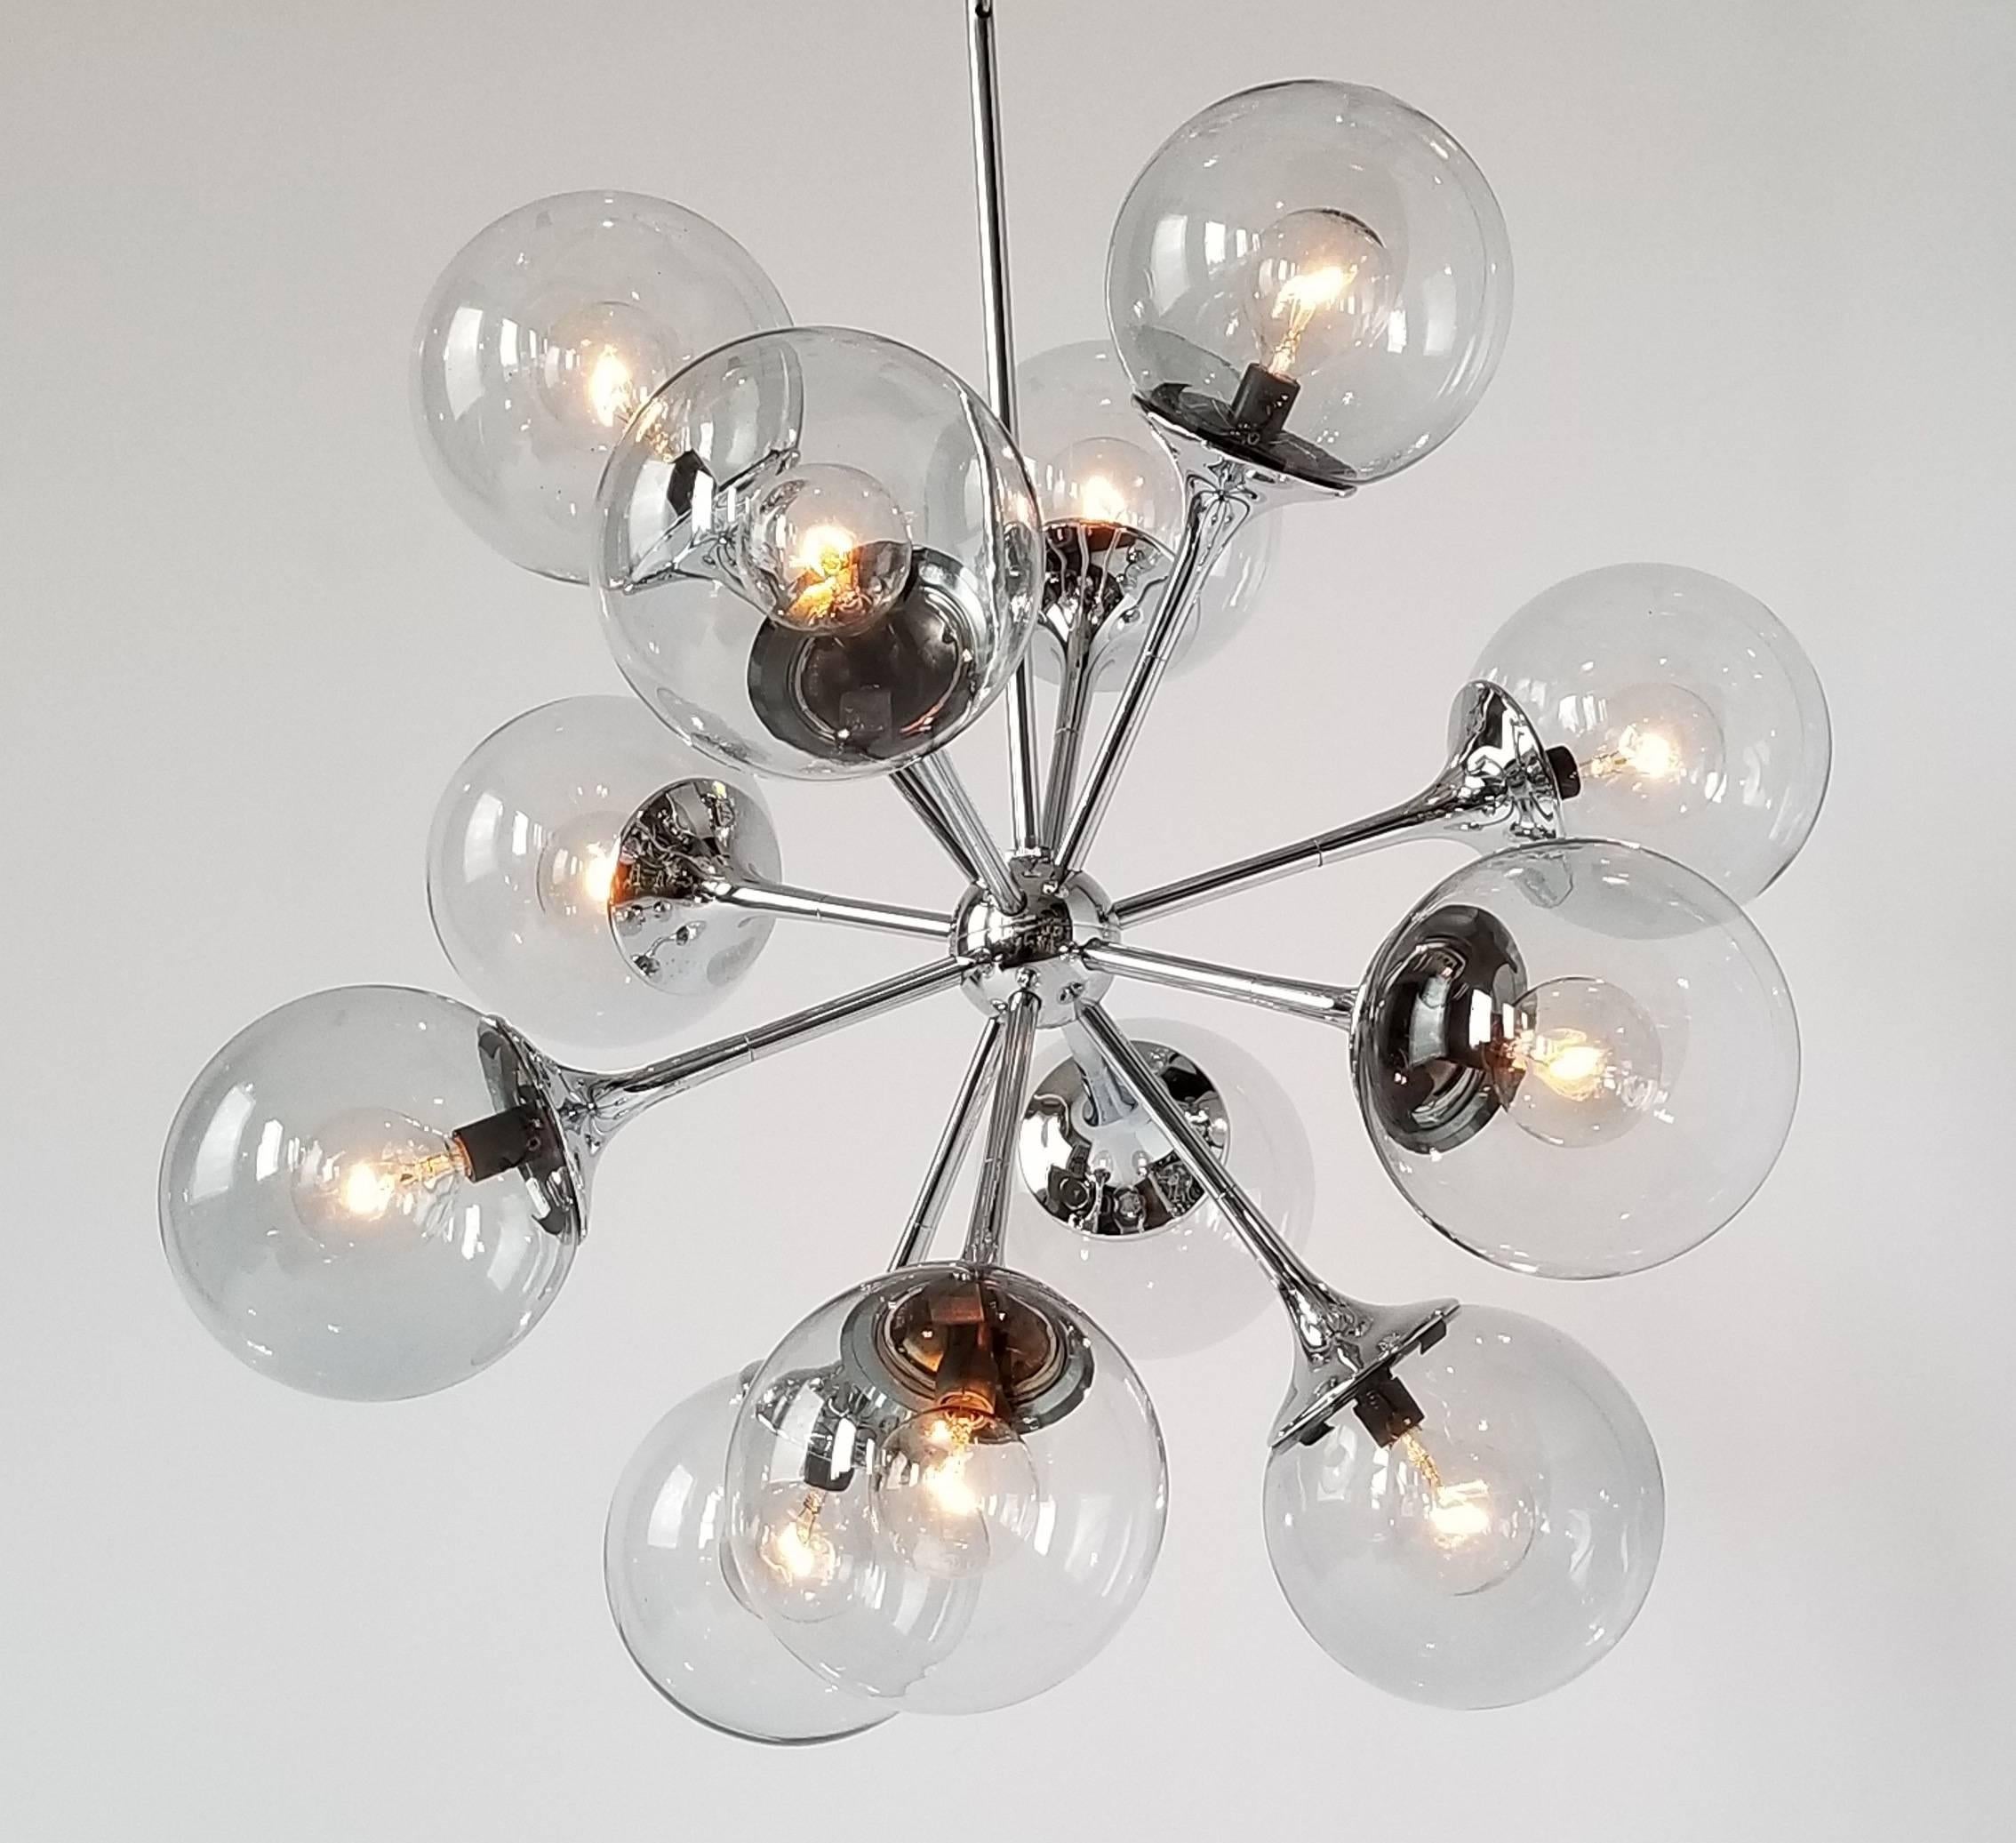 1970s deep chrome finish chandelier with mouth blowed glass shade. 

Well made solid construction. 

Contain 12 E12 candelabra size socket rated at 40 watt max. 

Sputnik measure 23 X 23 in. Total lenght with chain and canopy 31 in. 

Signed item.